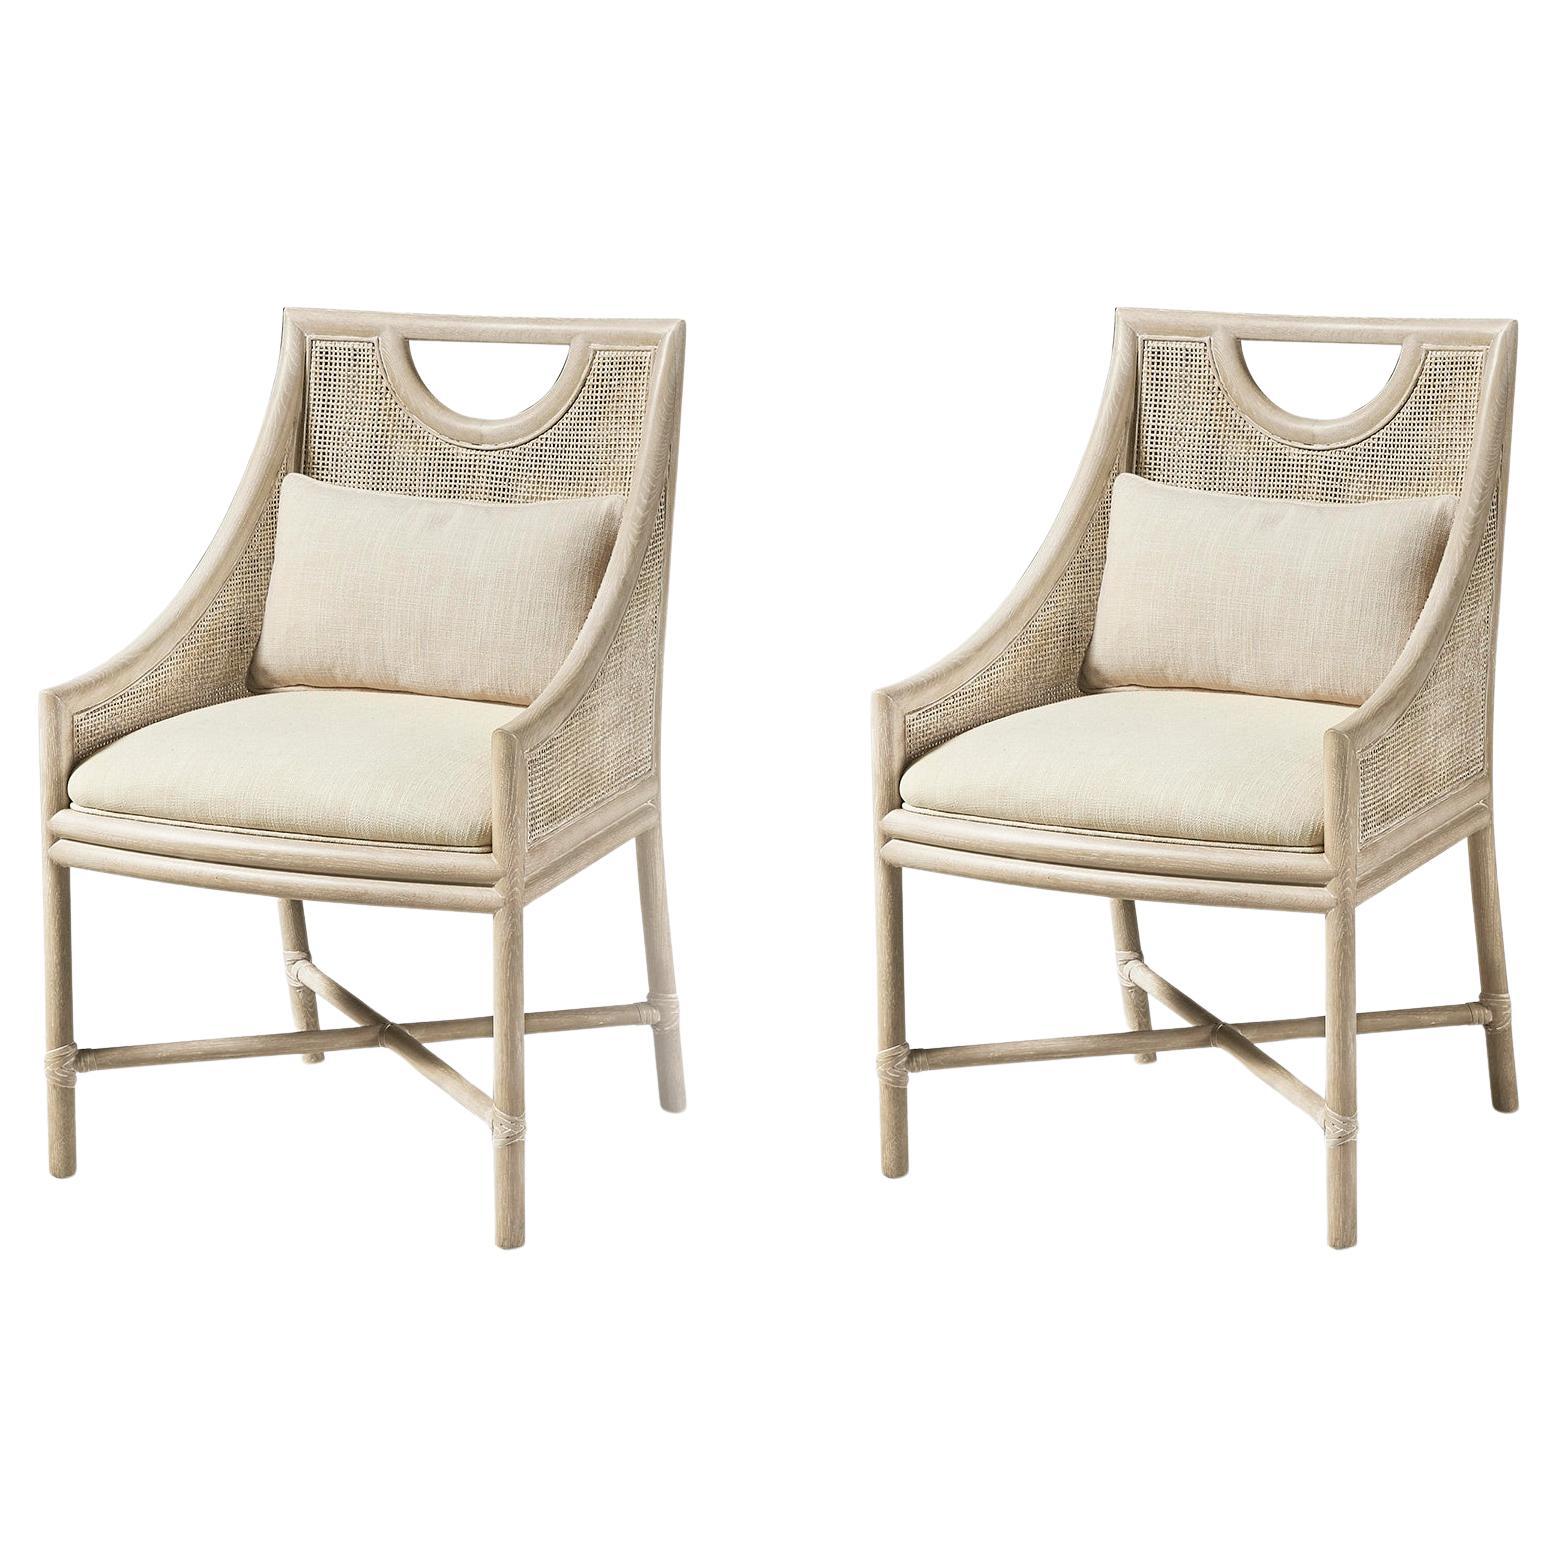 Modern Coastal Dining Chairs For Sale